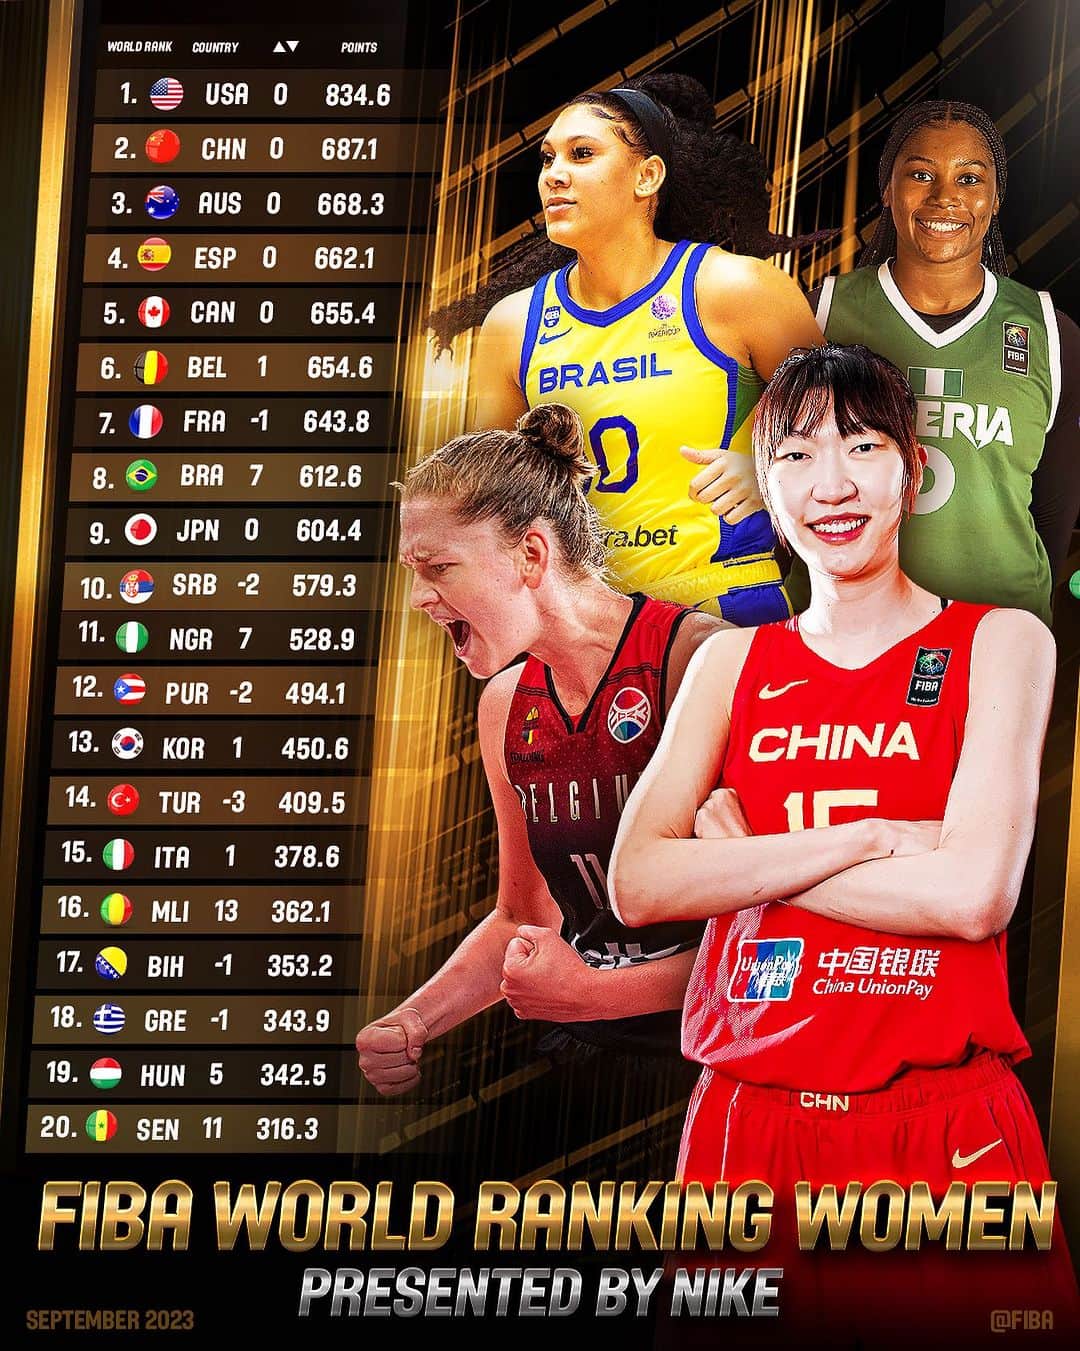 FIBAのインスタグラム：「🚨 New Women’s Ranking just dropped! 🚨  🇧🇪 Belgium, 🇧🇷 Brazil, 🇳🇬 Nigeria and 🇲🇱 Mali move up big in our latest edition of the Women's World Ranking, presented by Nike 📊」